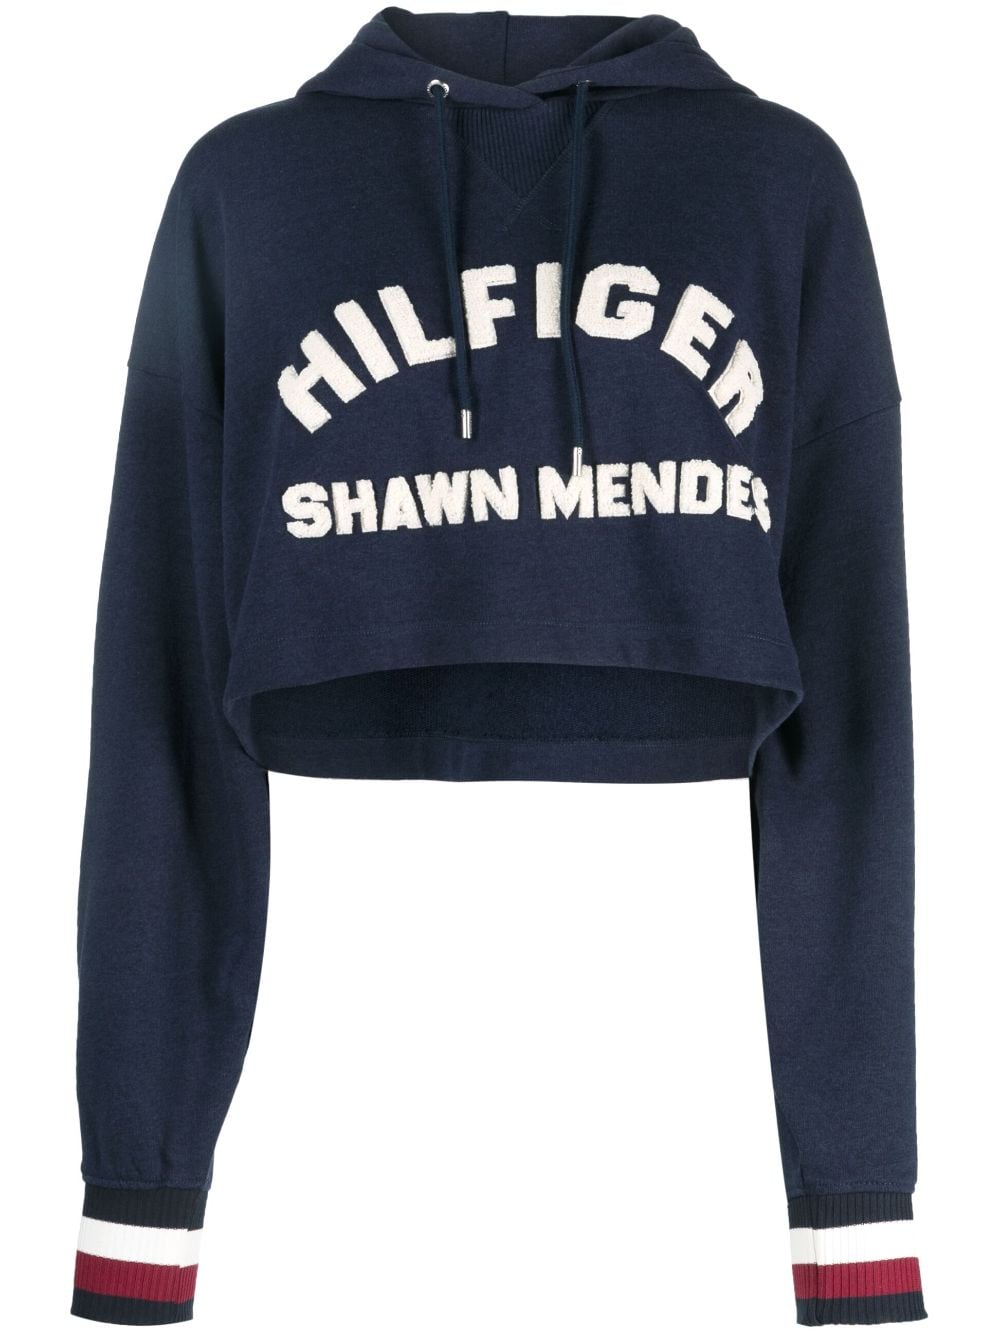 Image 1 of Tommy Hilfiger x Shawn Mendes cropped hoodie